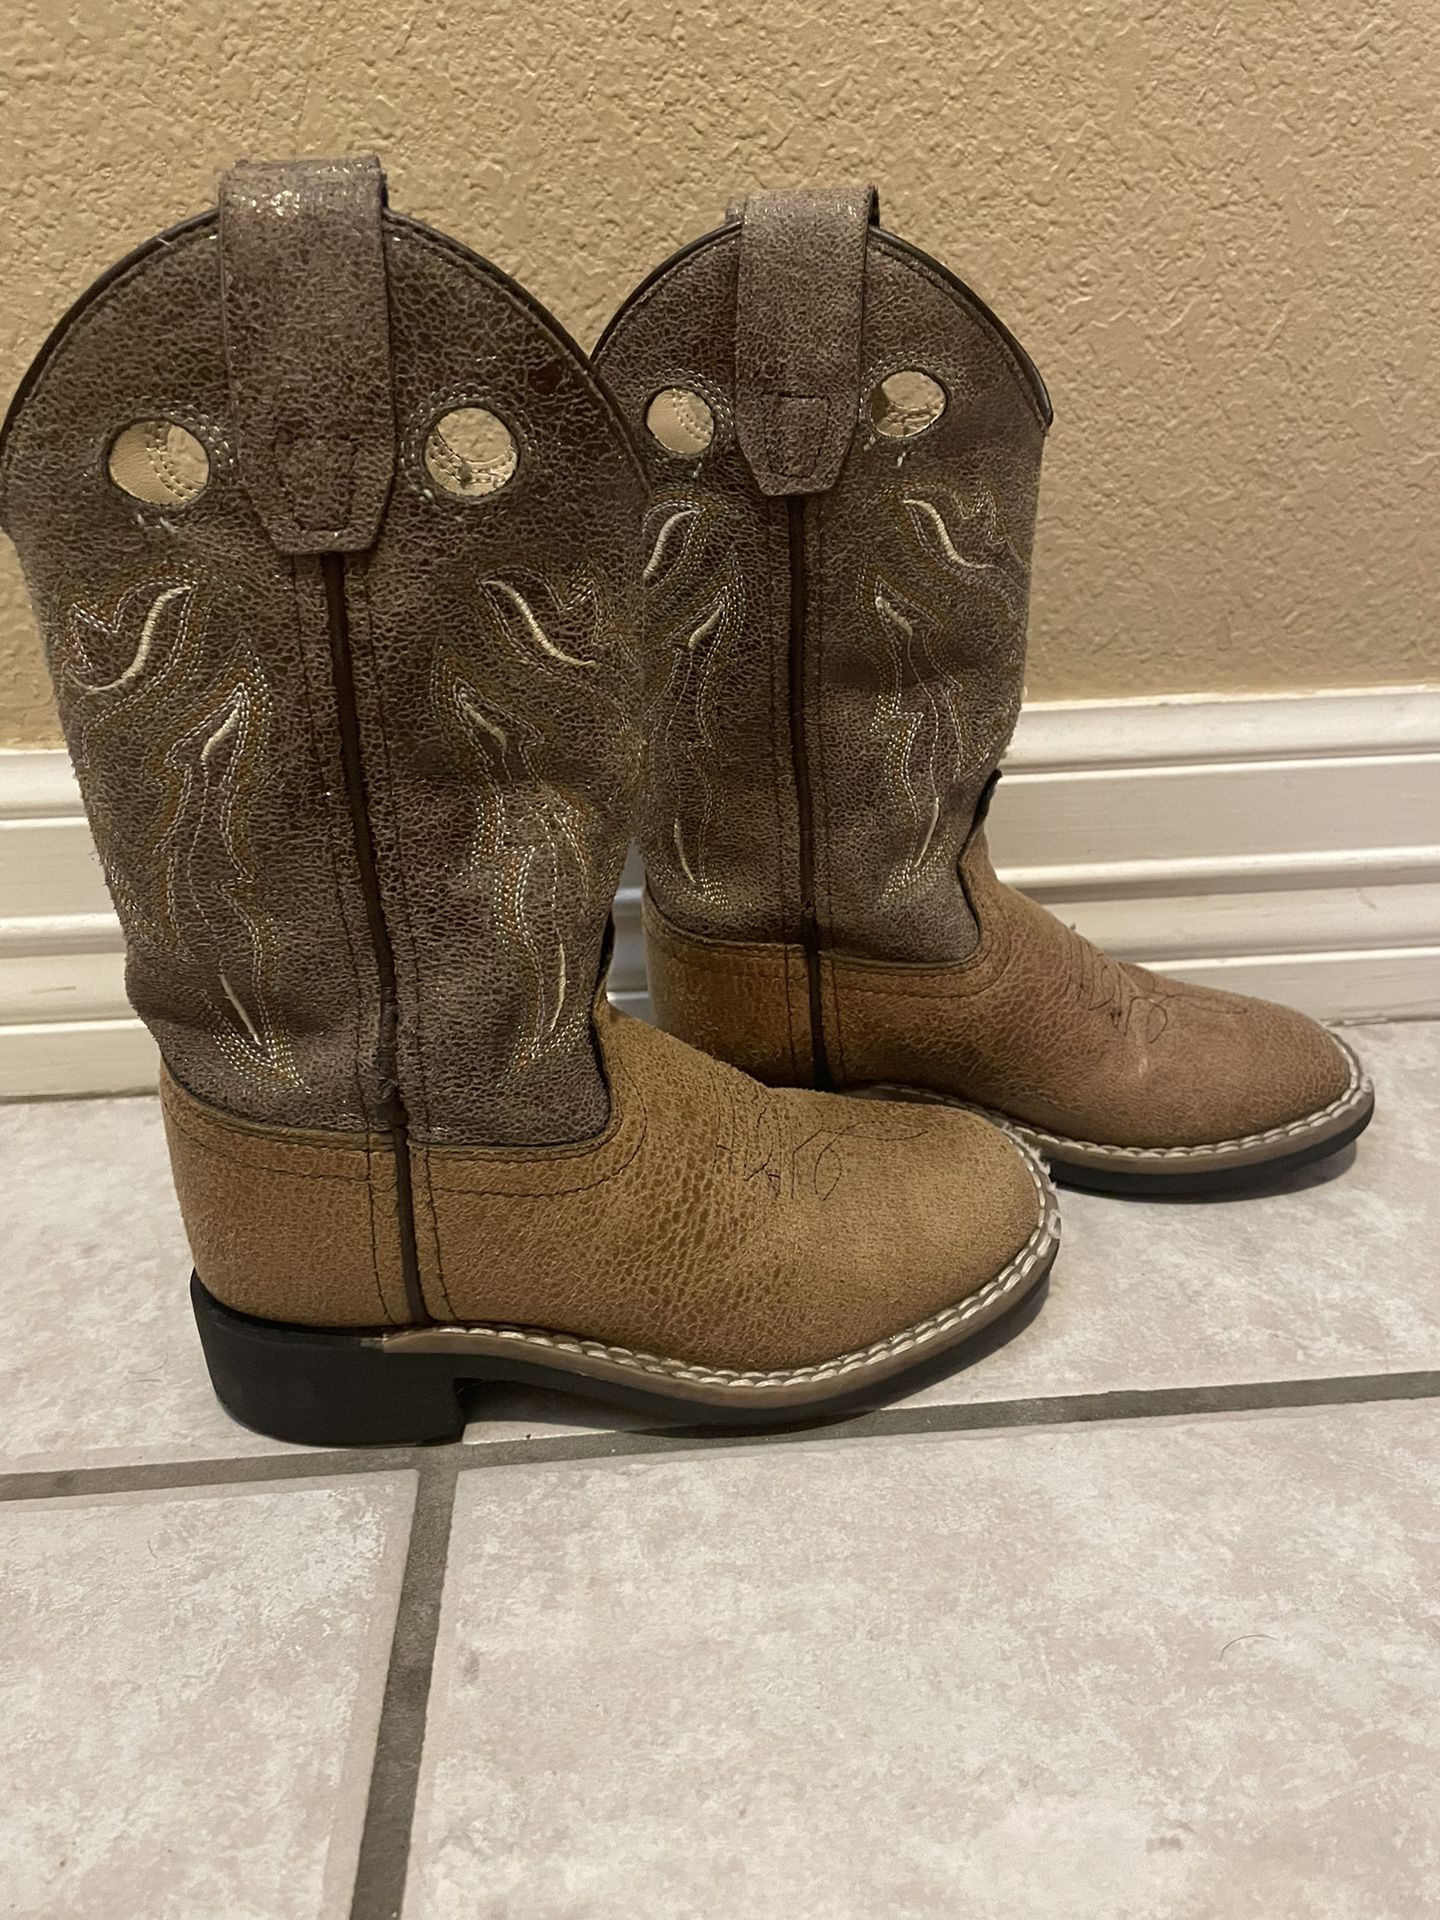 Toddler Cowboy Boots Size 10 